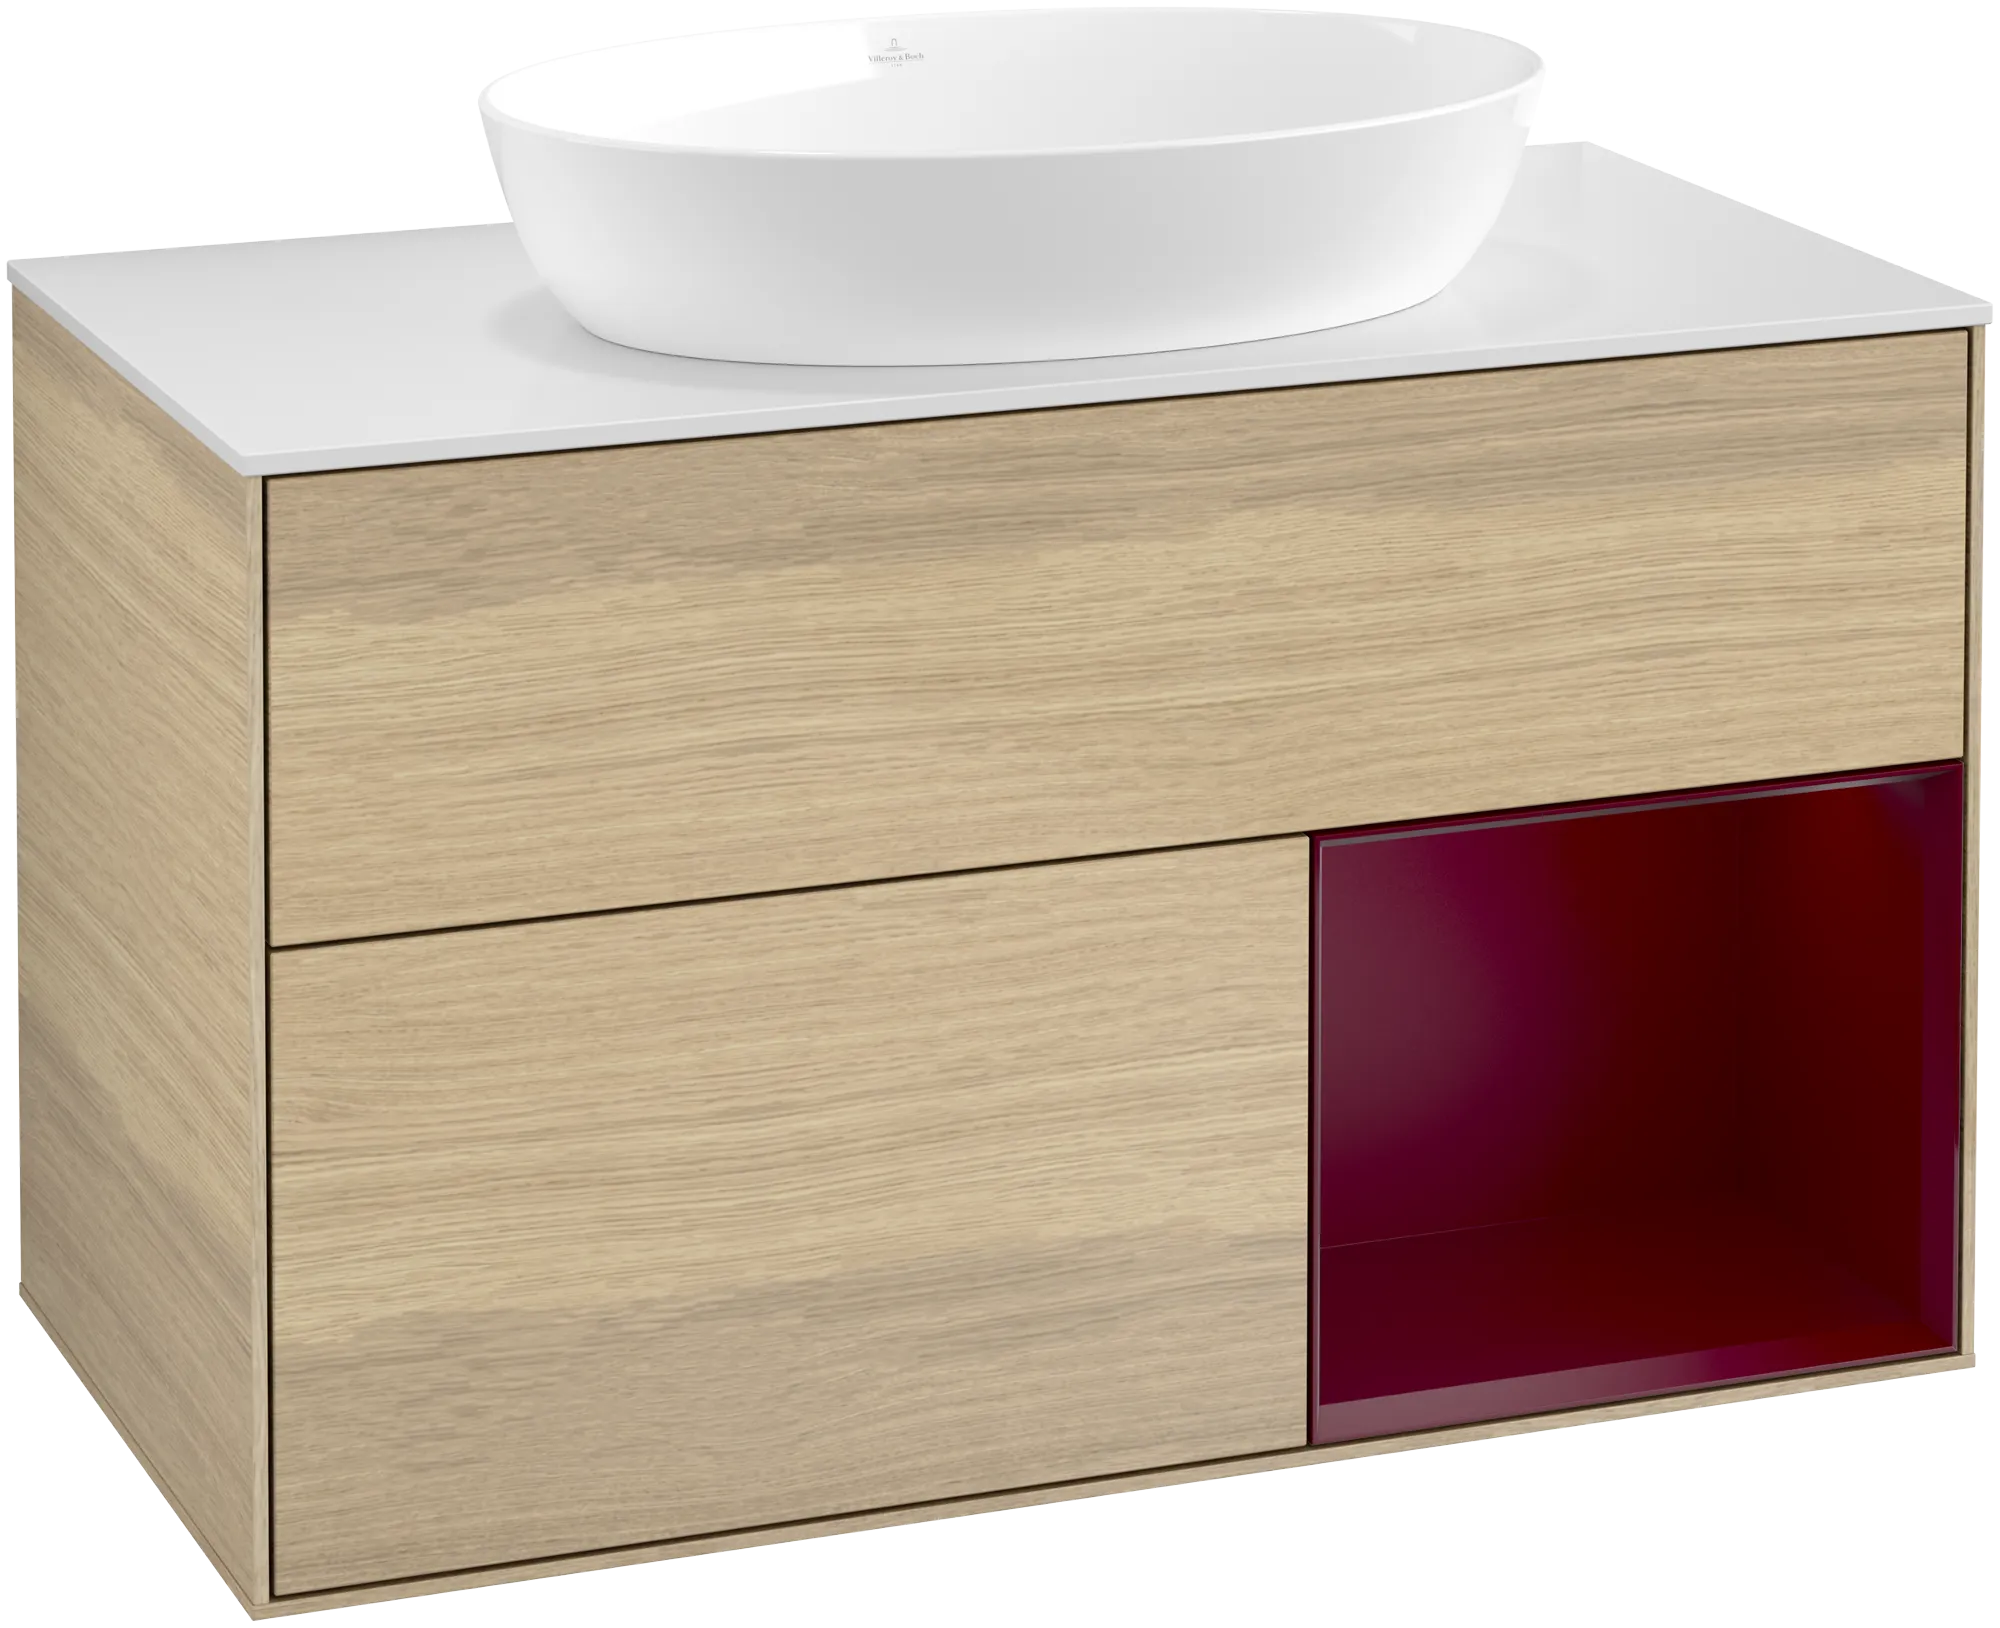 Picture of VILLEROY BOCH Finion Vanity unit, with lighting, 2 pull-out compartments, 1000 x 603 x 501 mm, Oak Veneer / Peony Matt Lacquer / Glass White Matt #GA21HBPC